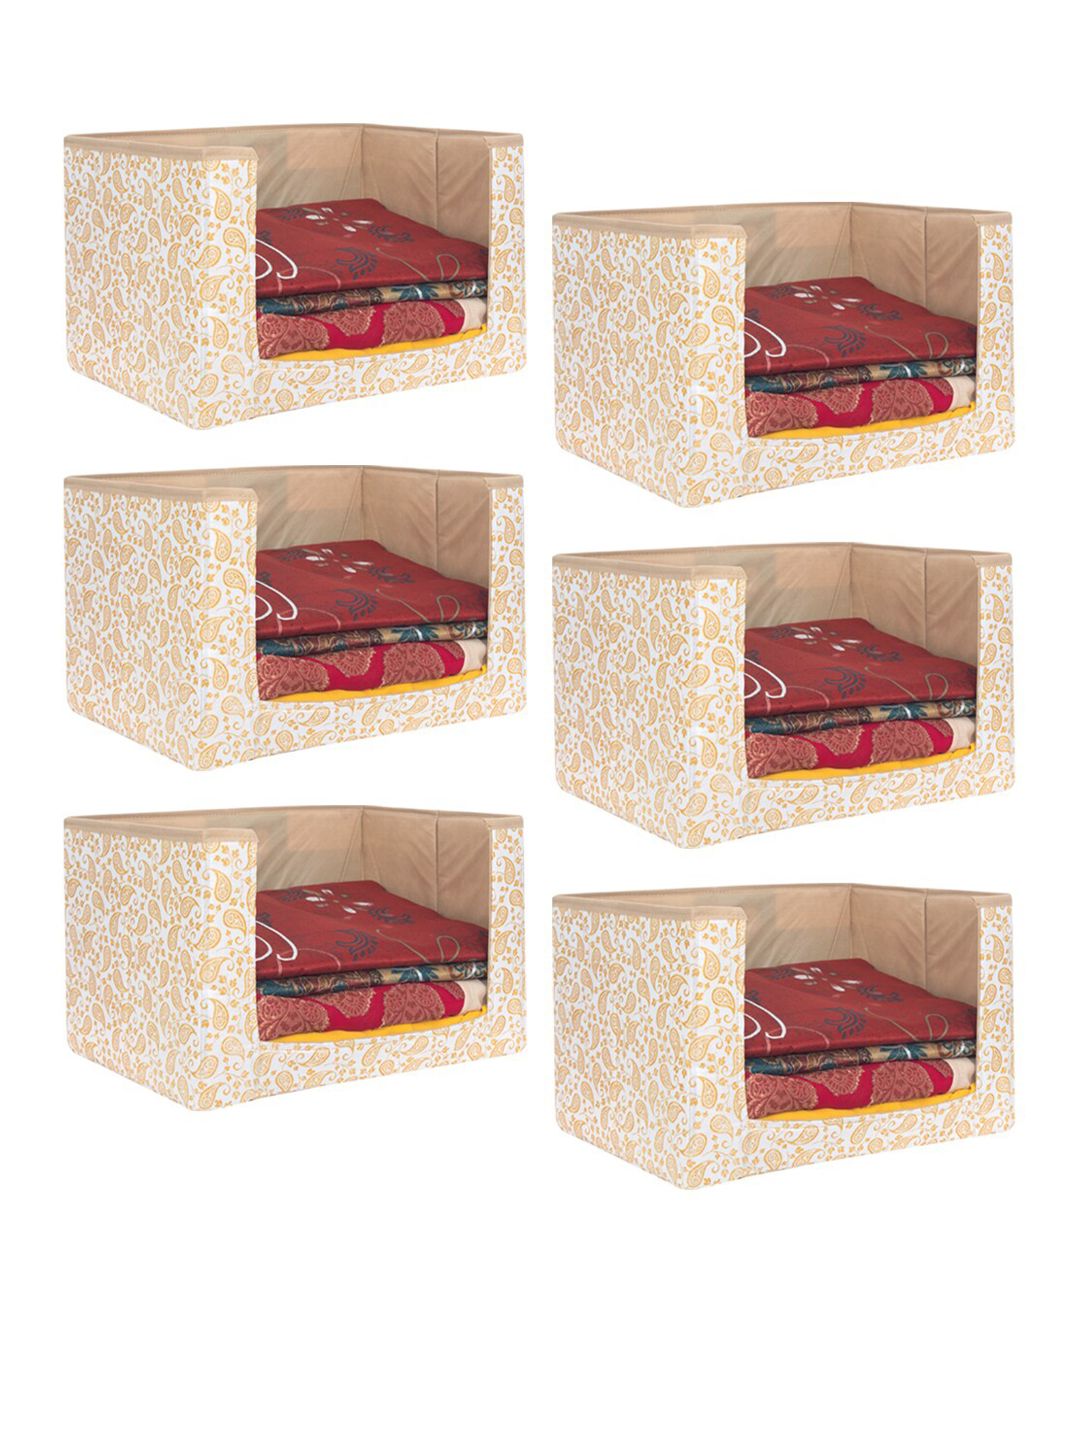 prettykrafts Set Of 6 White & Beige Printed Cloth Saree Stacker Organisers Price in India